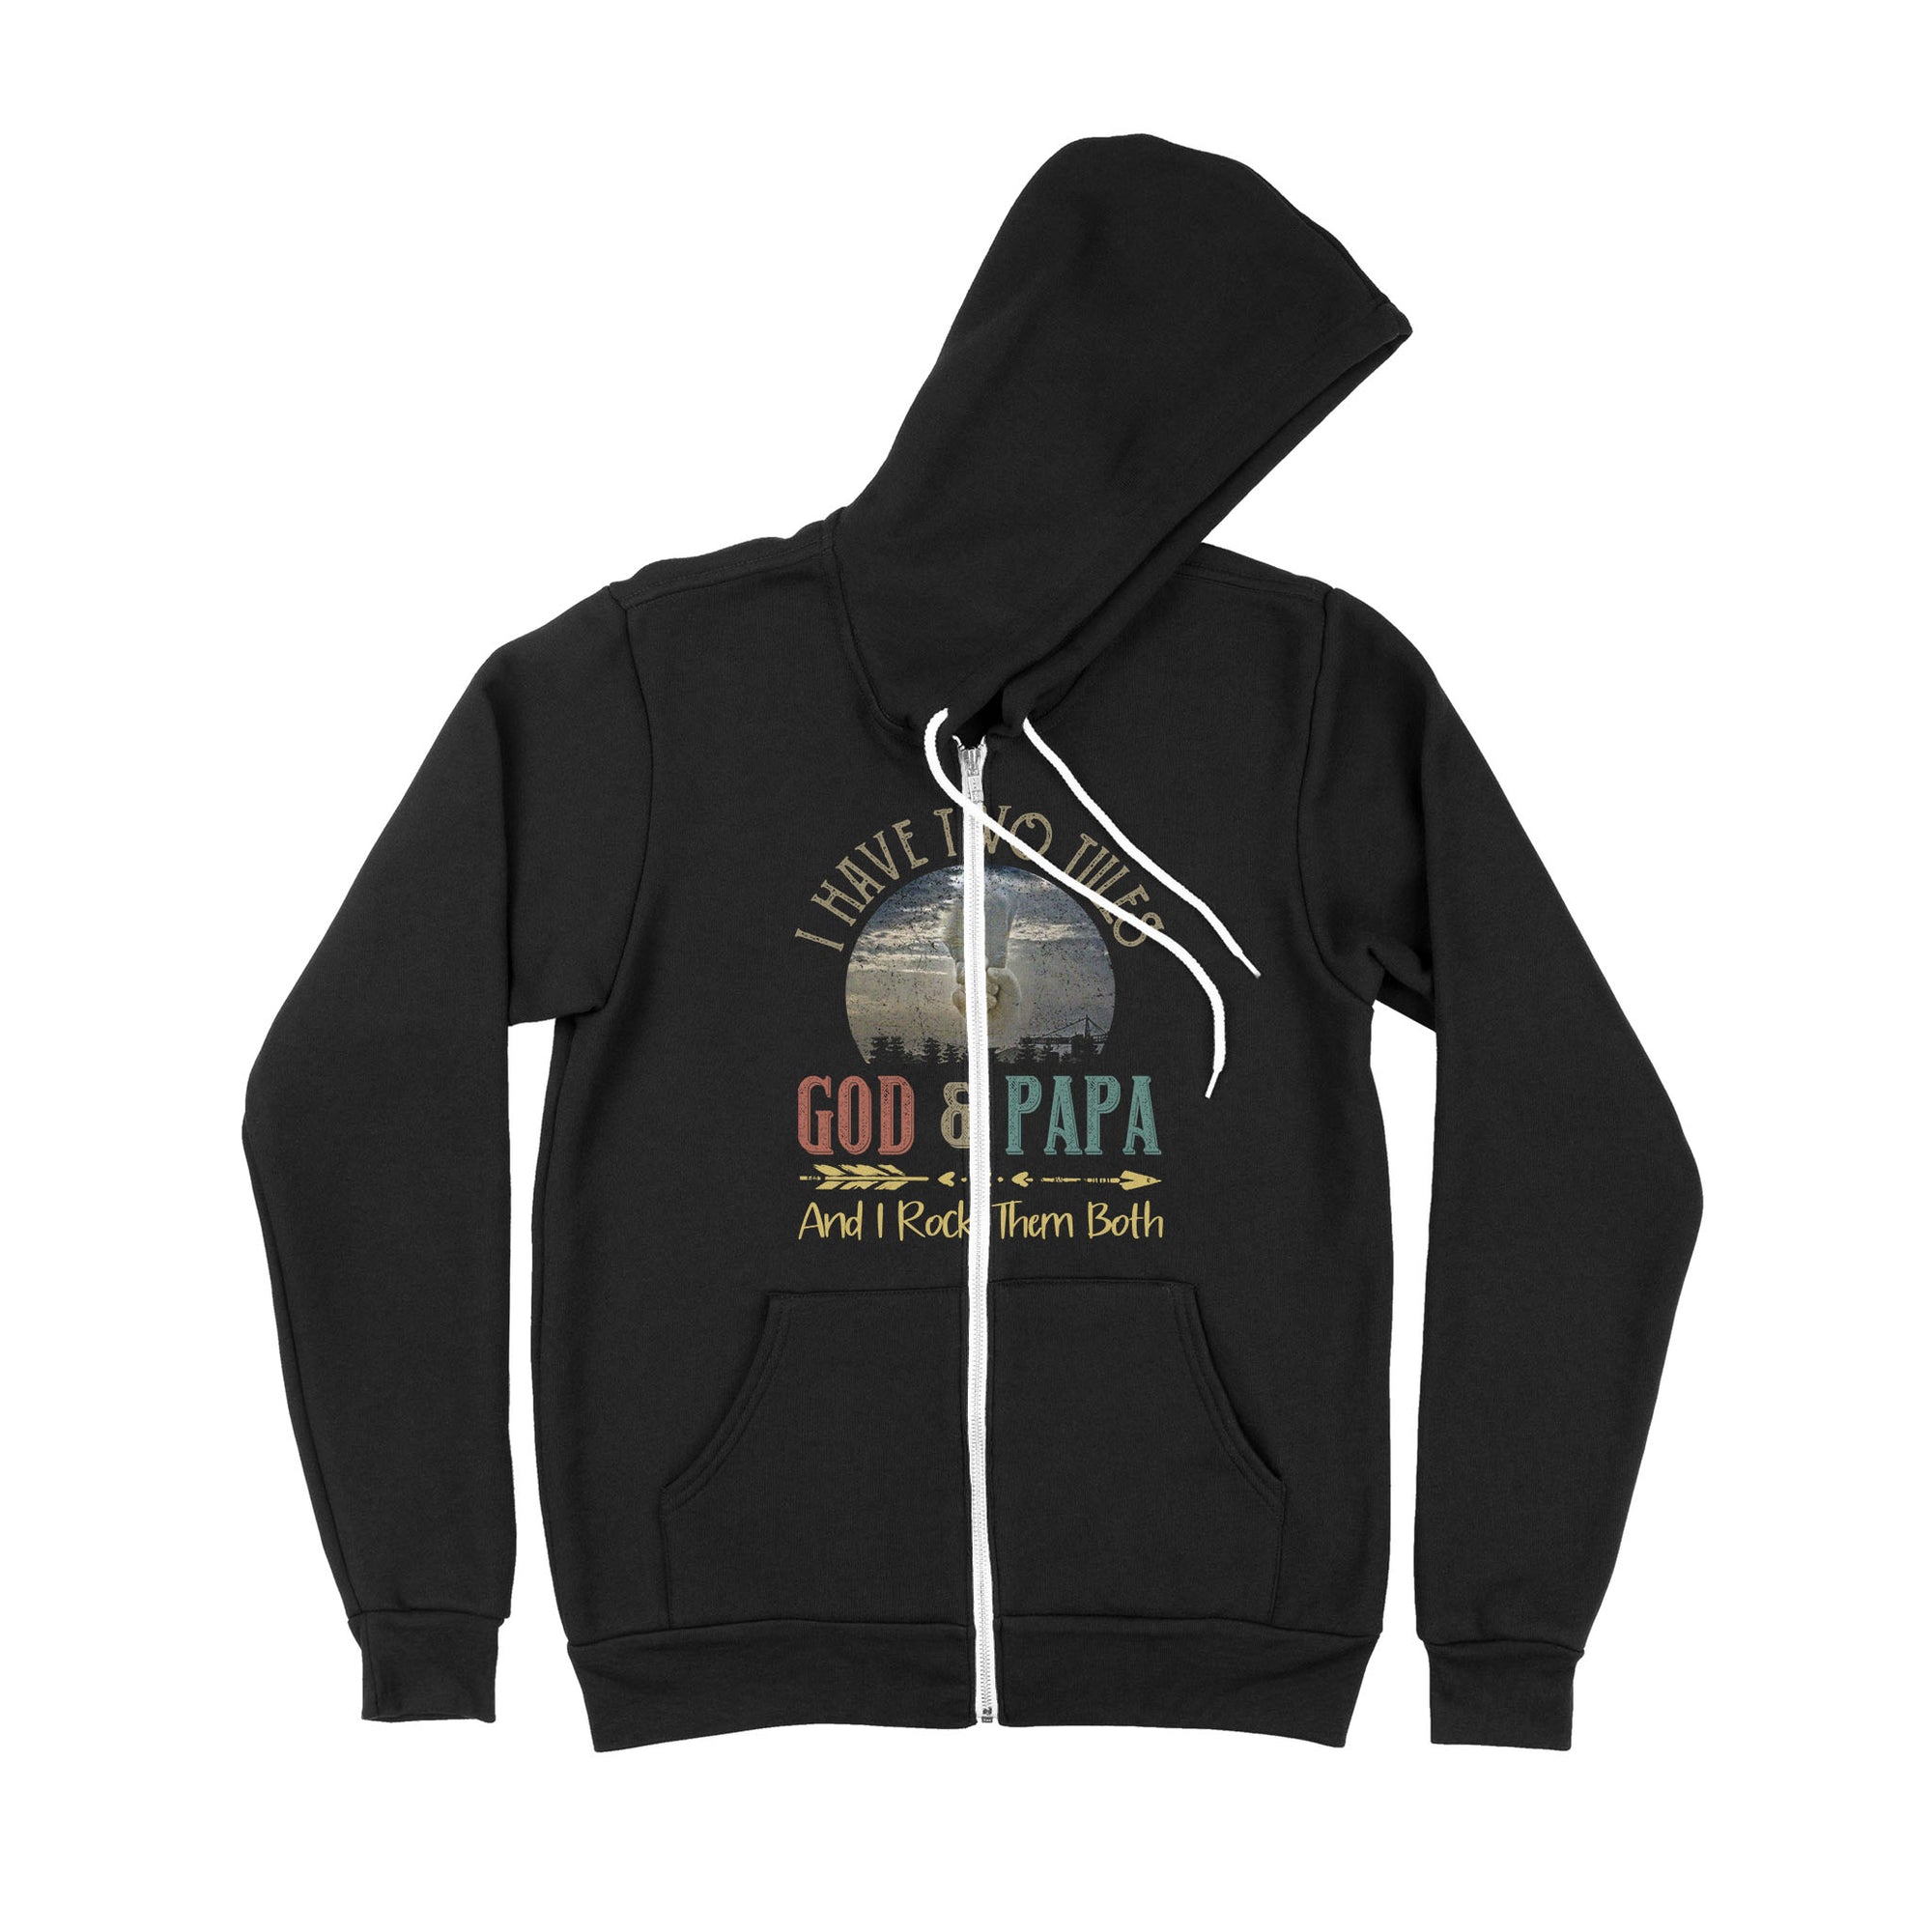 I Have Two Titles God And Papa - Premium Zip Hoodie